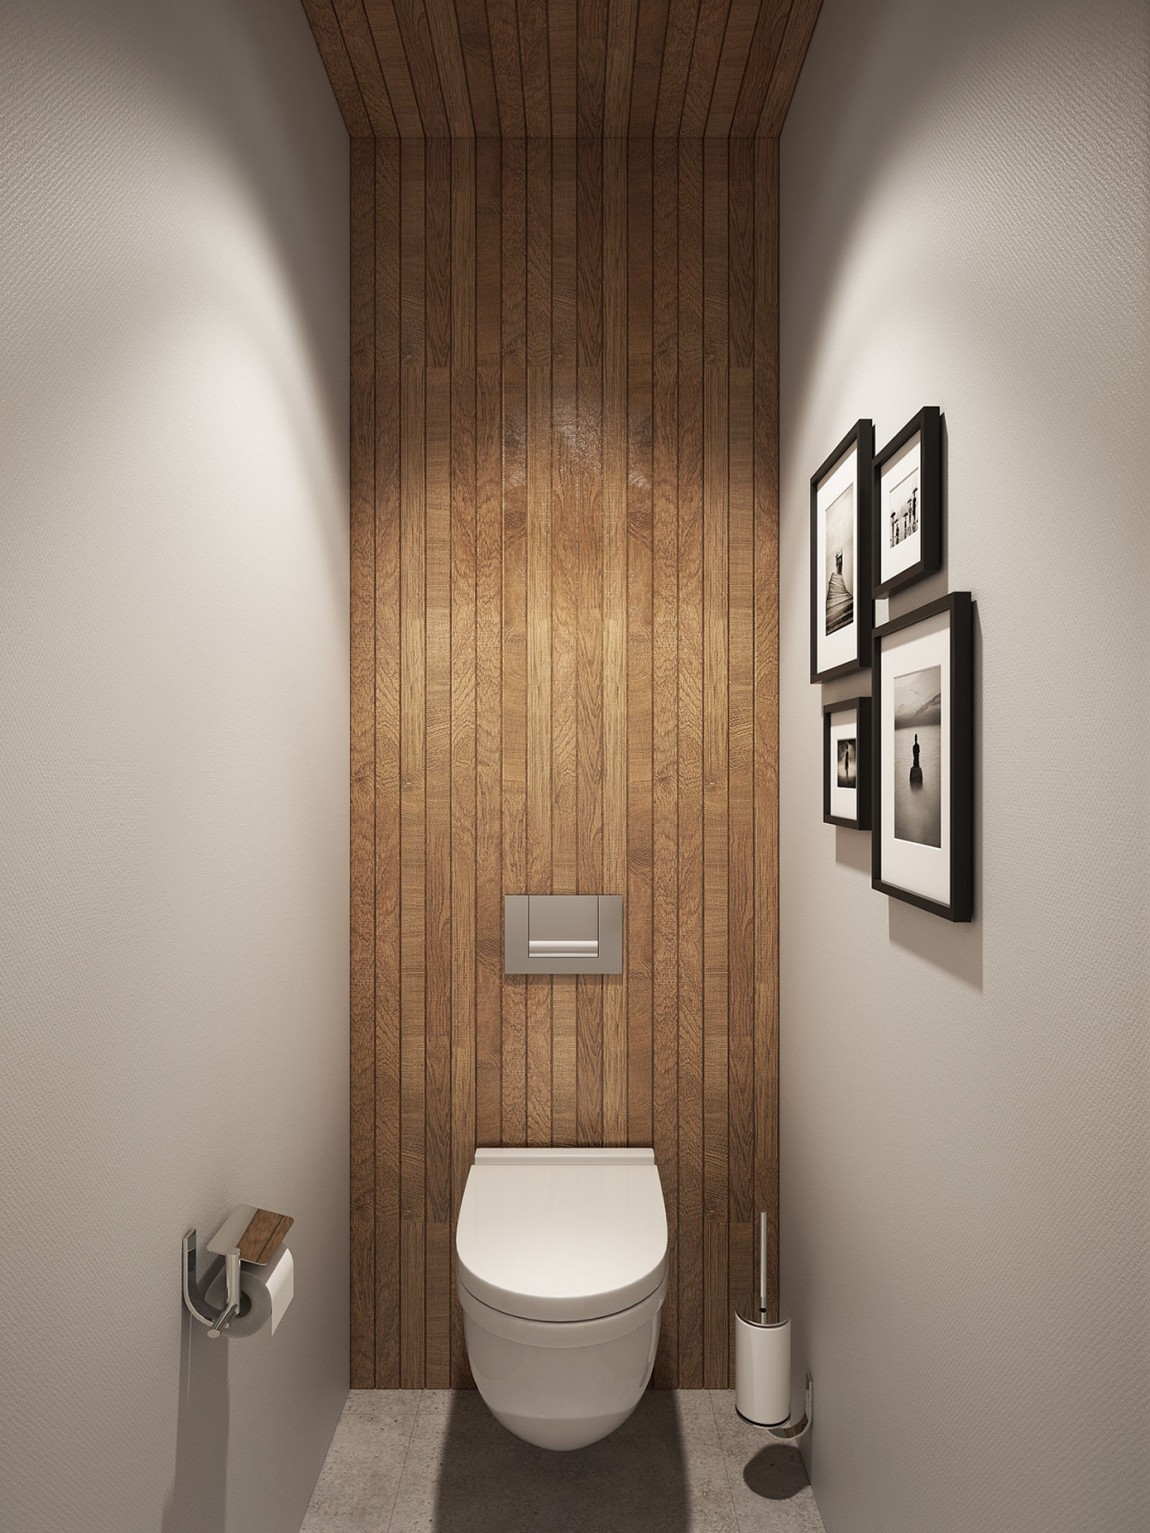 Small bathroom design idea with wooden accents